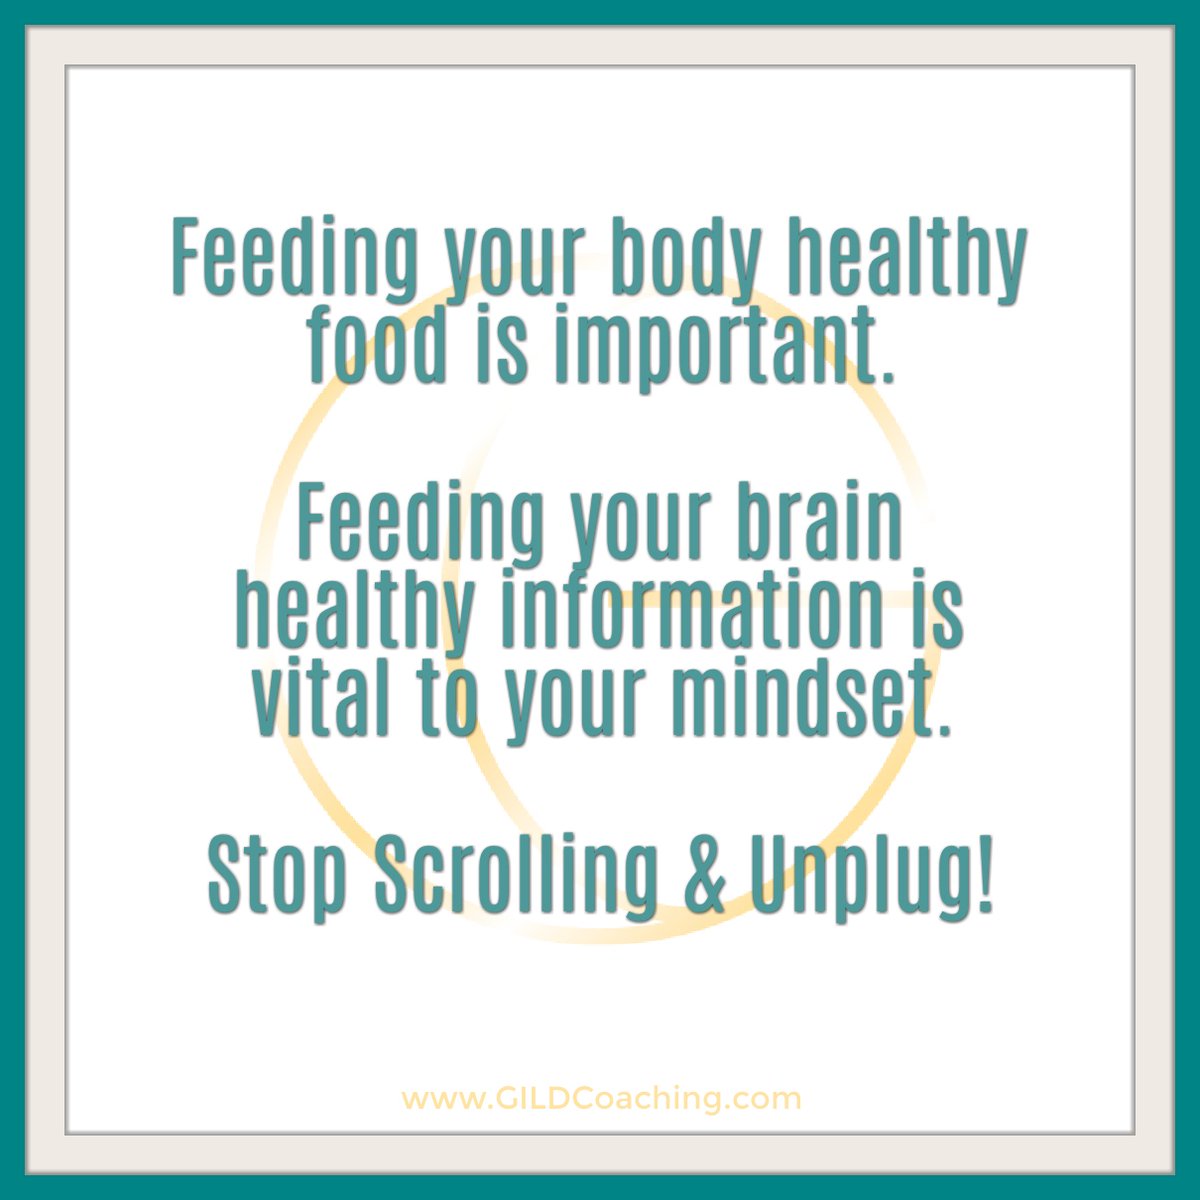 What are you feeding your mind today?
Ready to shift your mindset?
gildcoaching.com
#bodyhealth #mindsethealth #mindsetshift #mindsetcoach